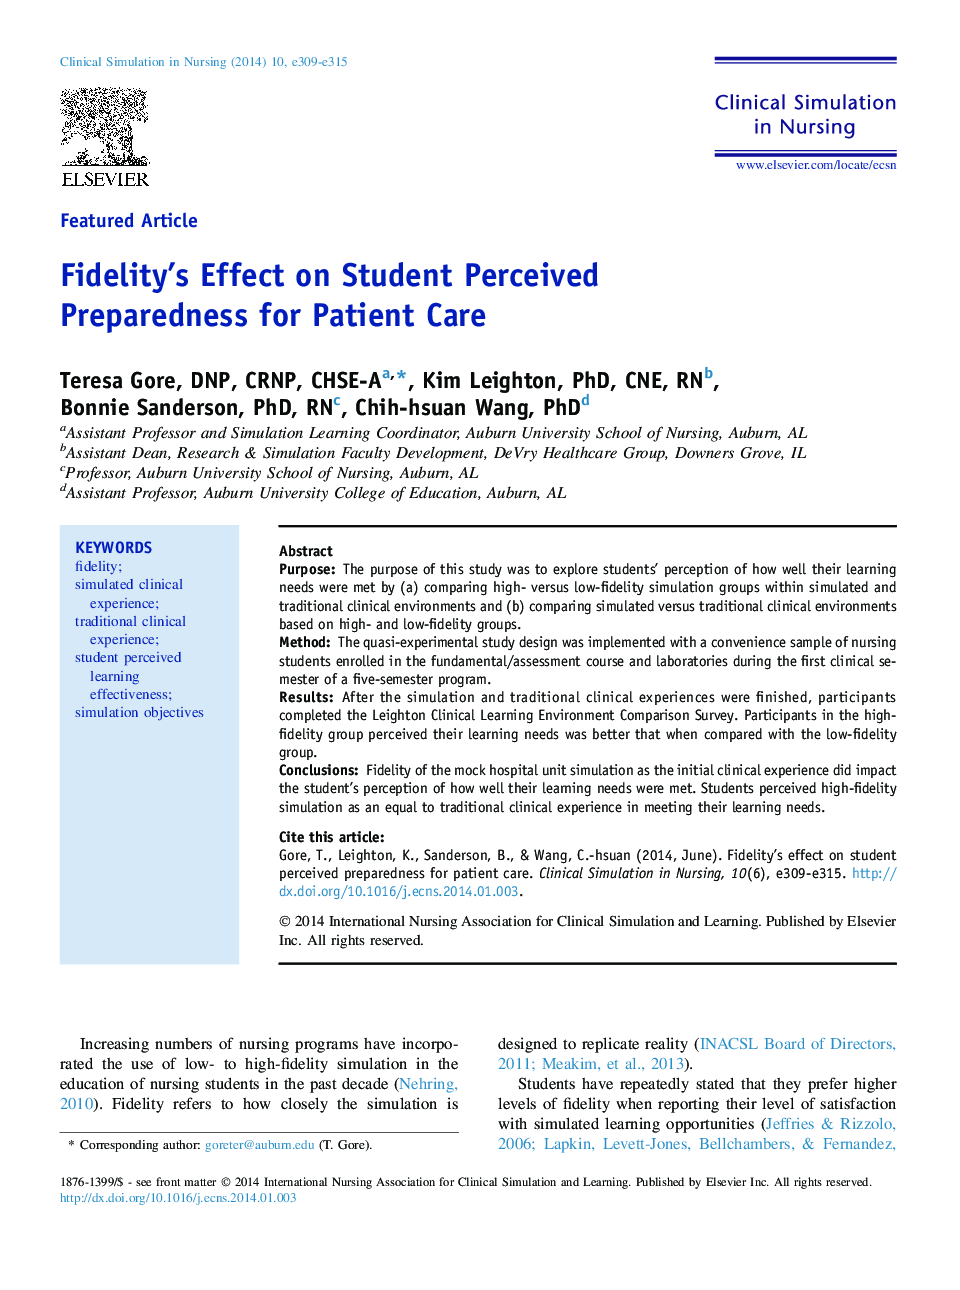 Fidelity's Effect on Student Perceived Preparedness for Patient Care